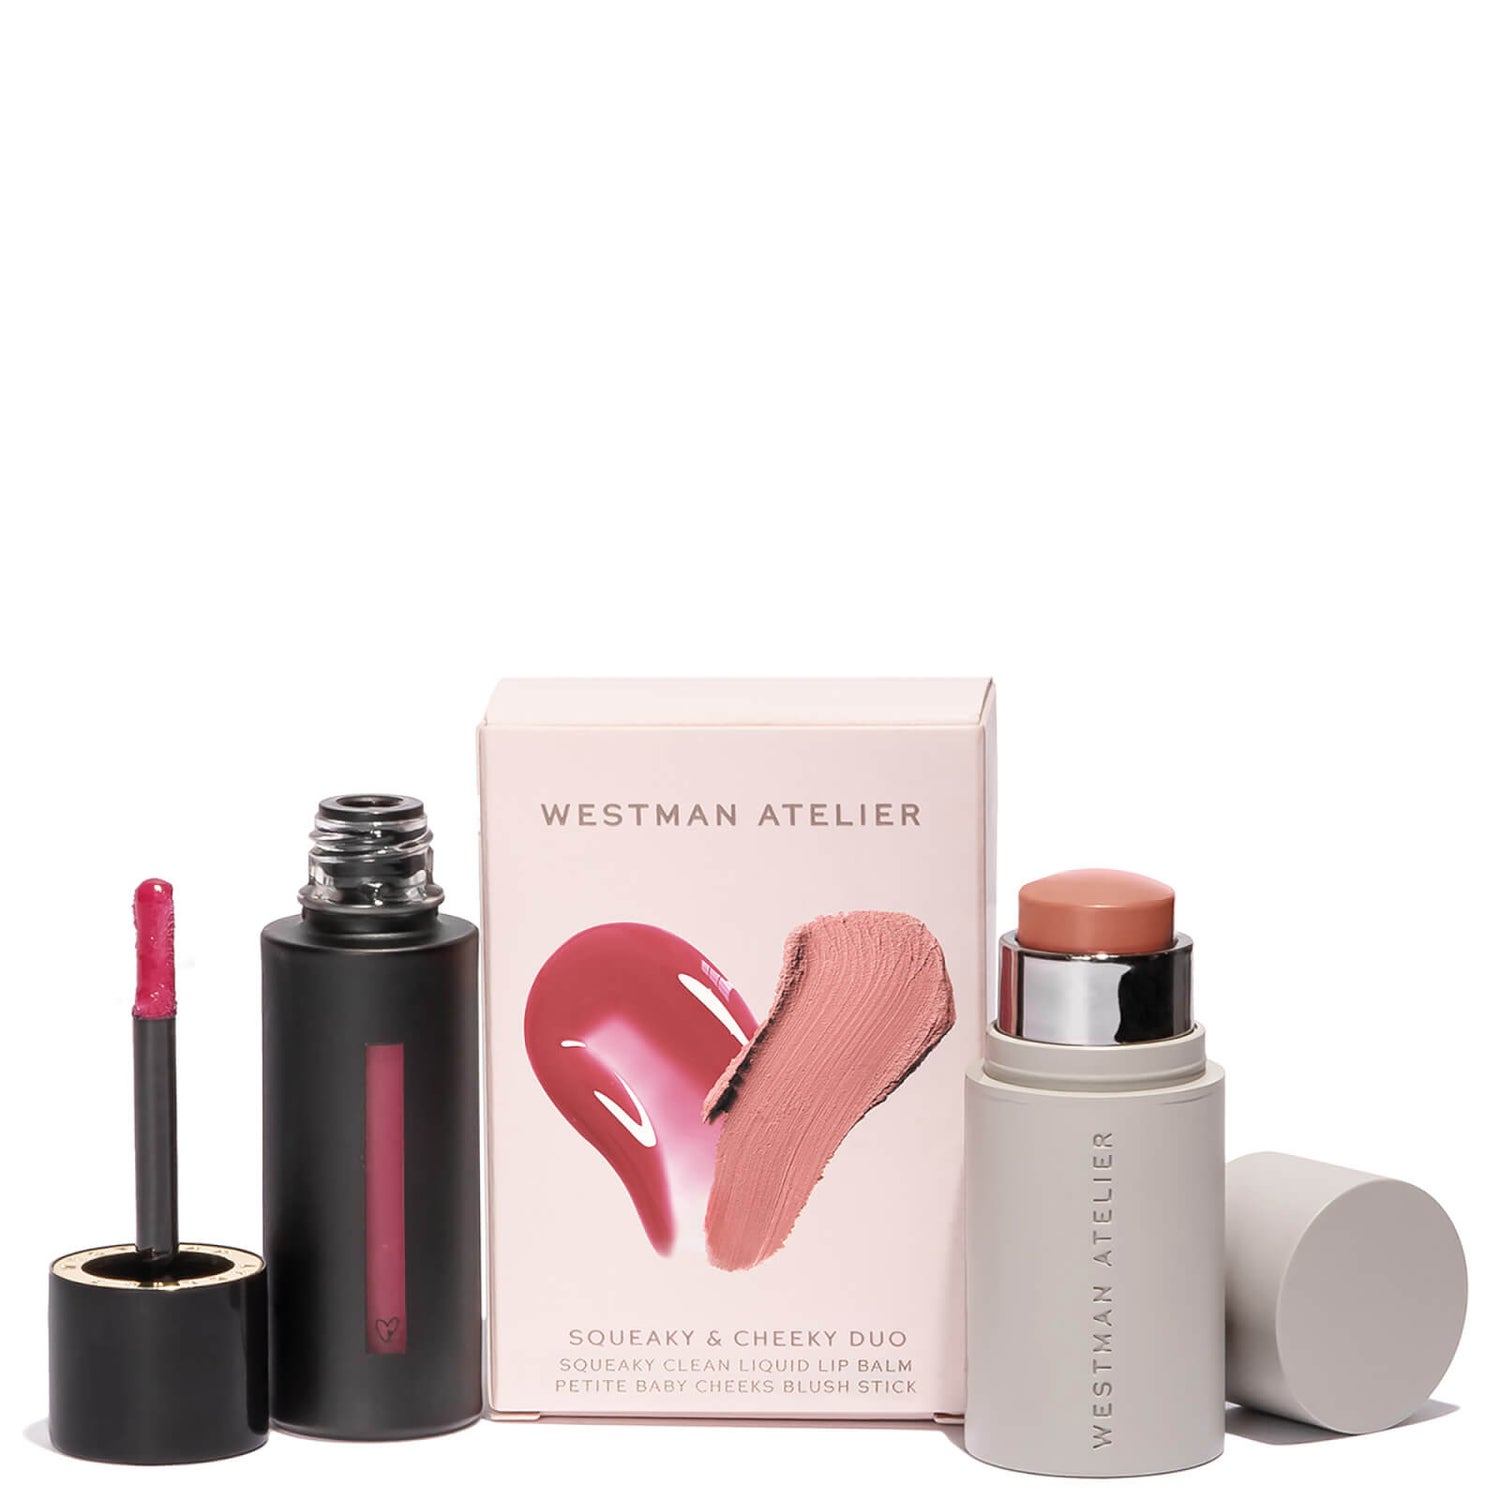 Westman Atelier Squeaky and Cheeky Duo I | Cult Beauty